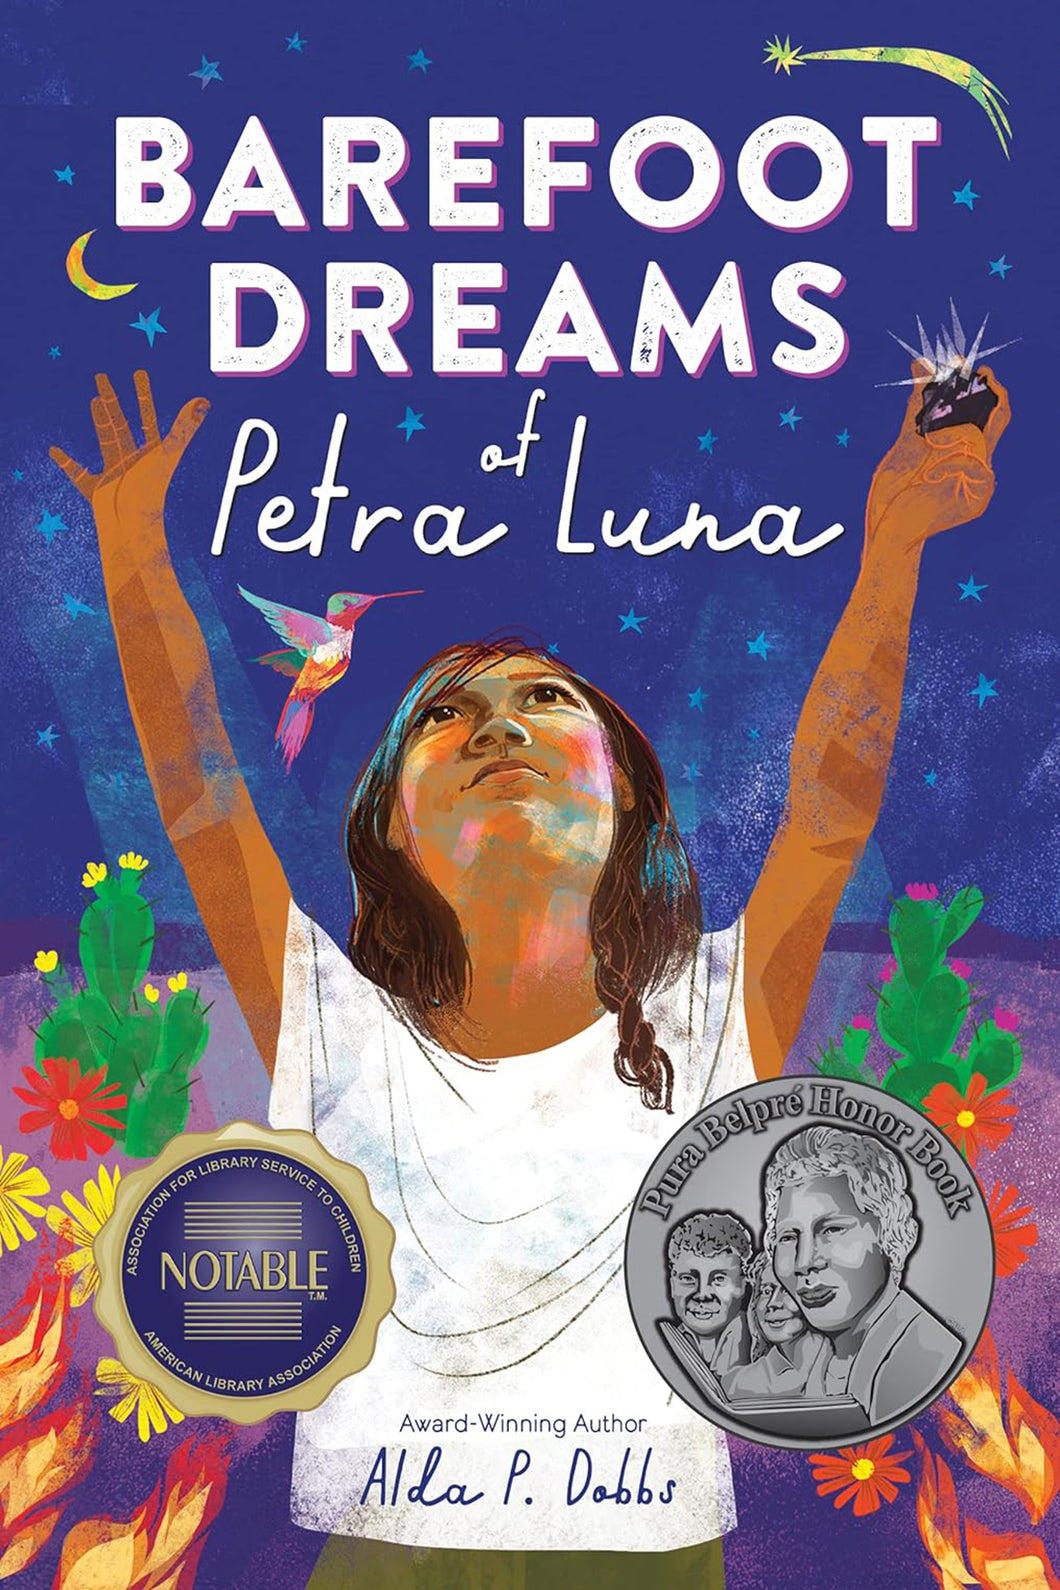 Barefoot Dreams of Petra Luna by Alda P. Dobbs / Hardcover or Paperback - NEW BOOK